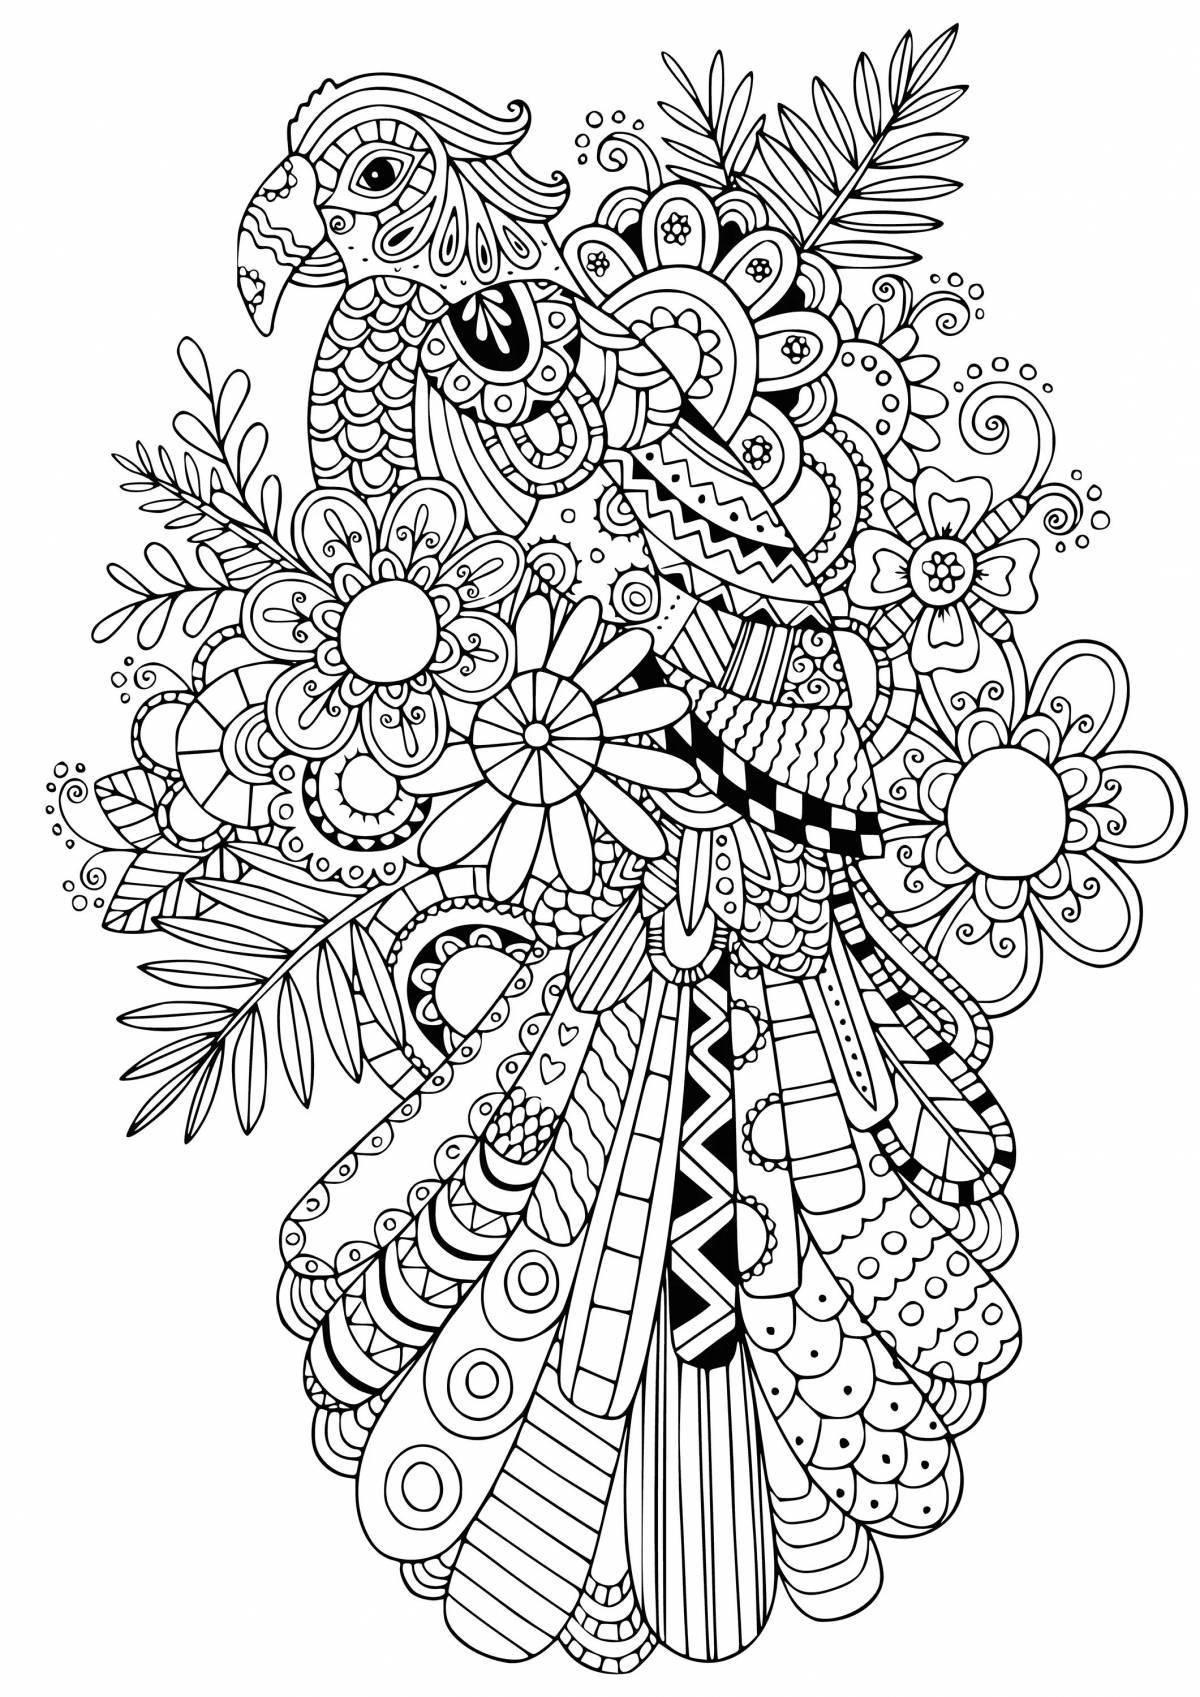 Calming coloring book relax antistress for adults